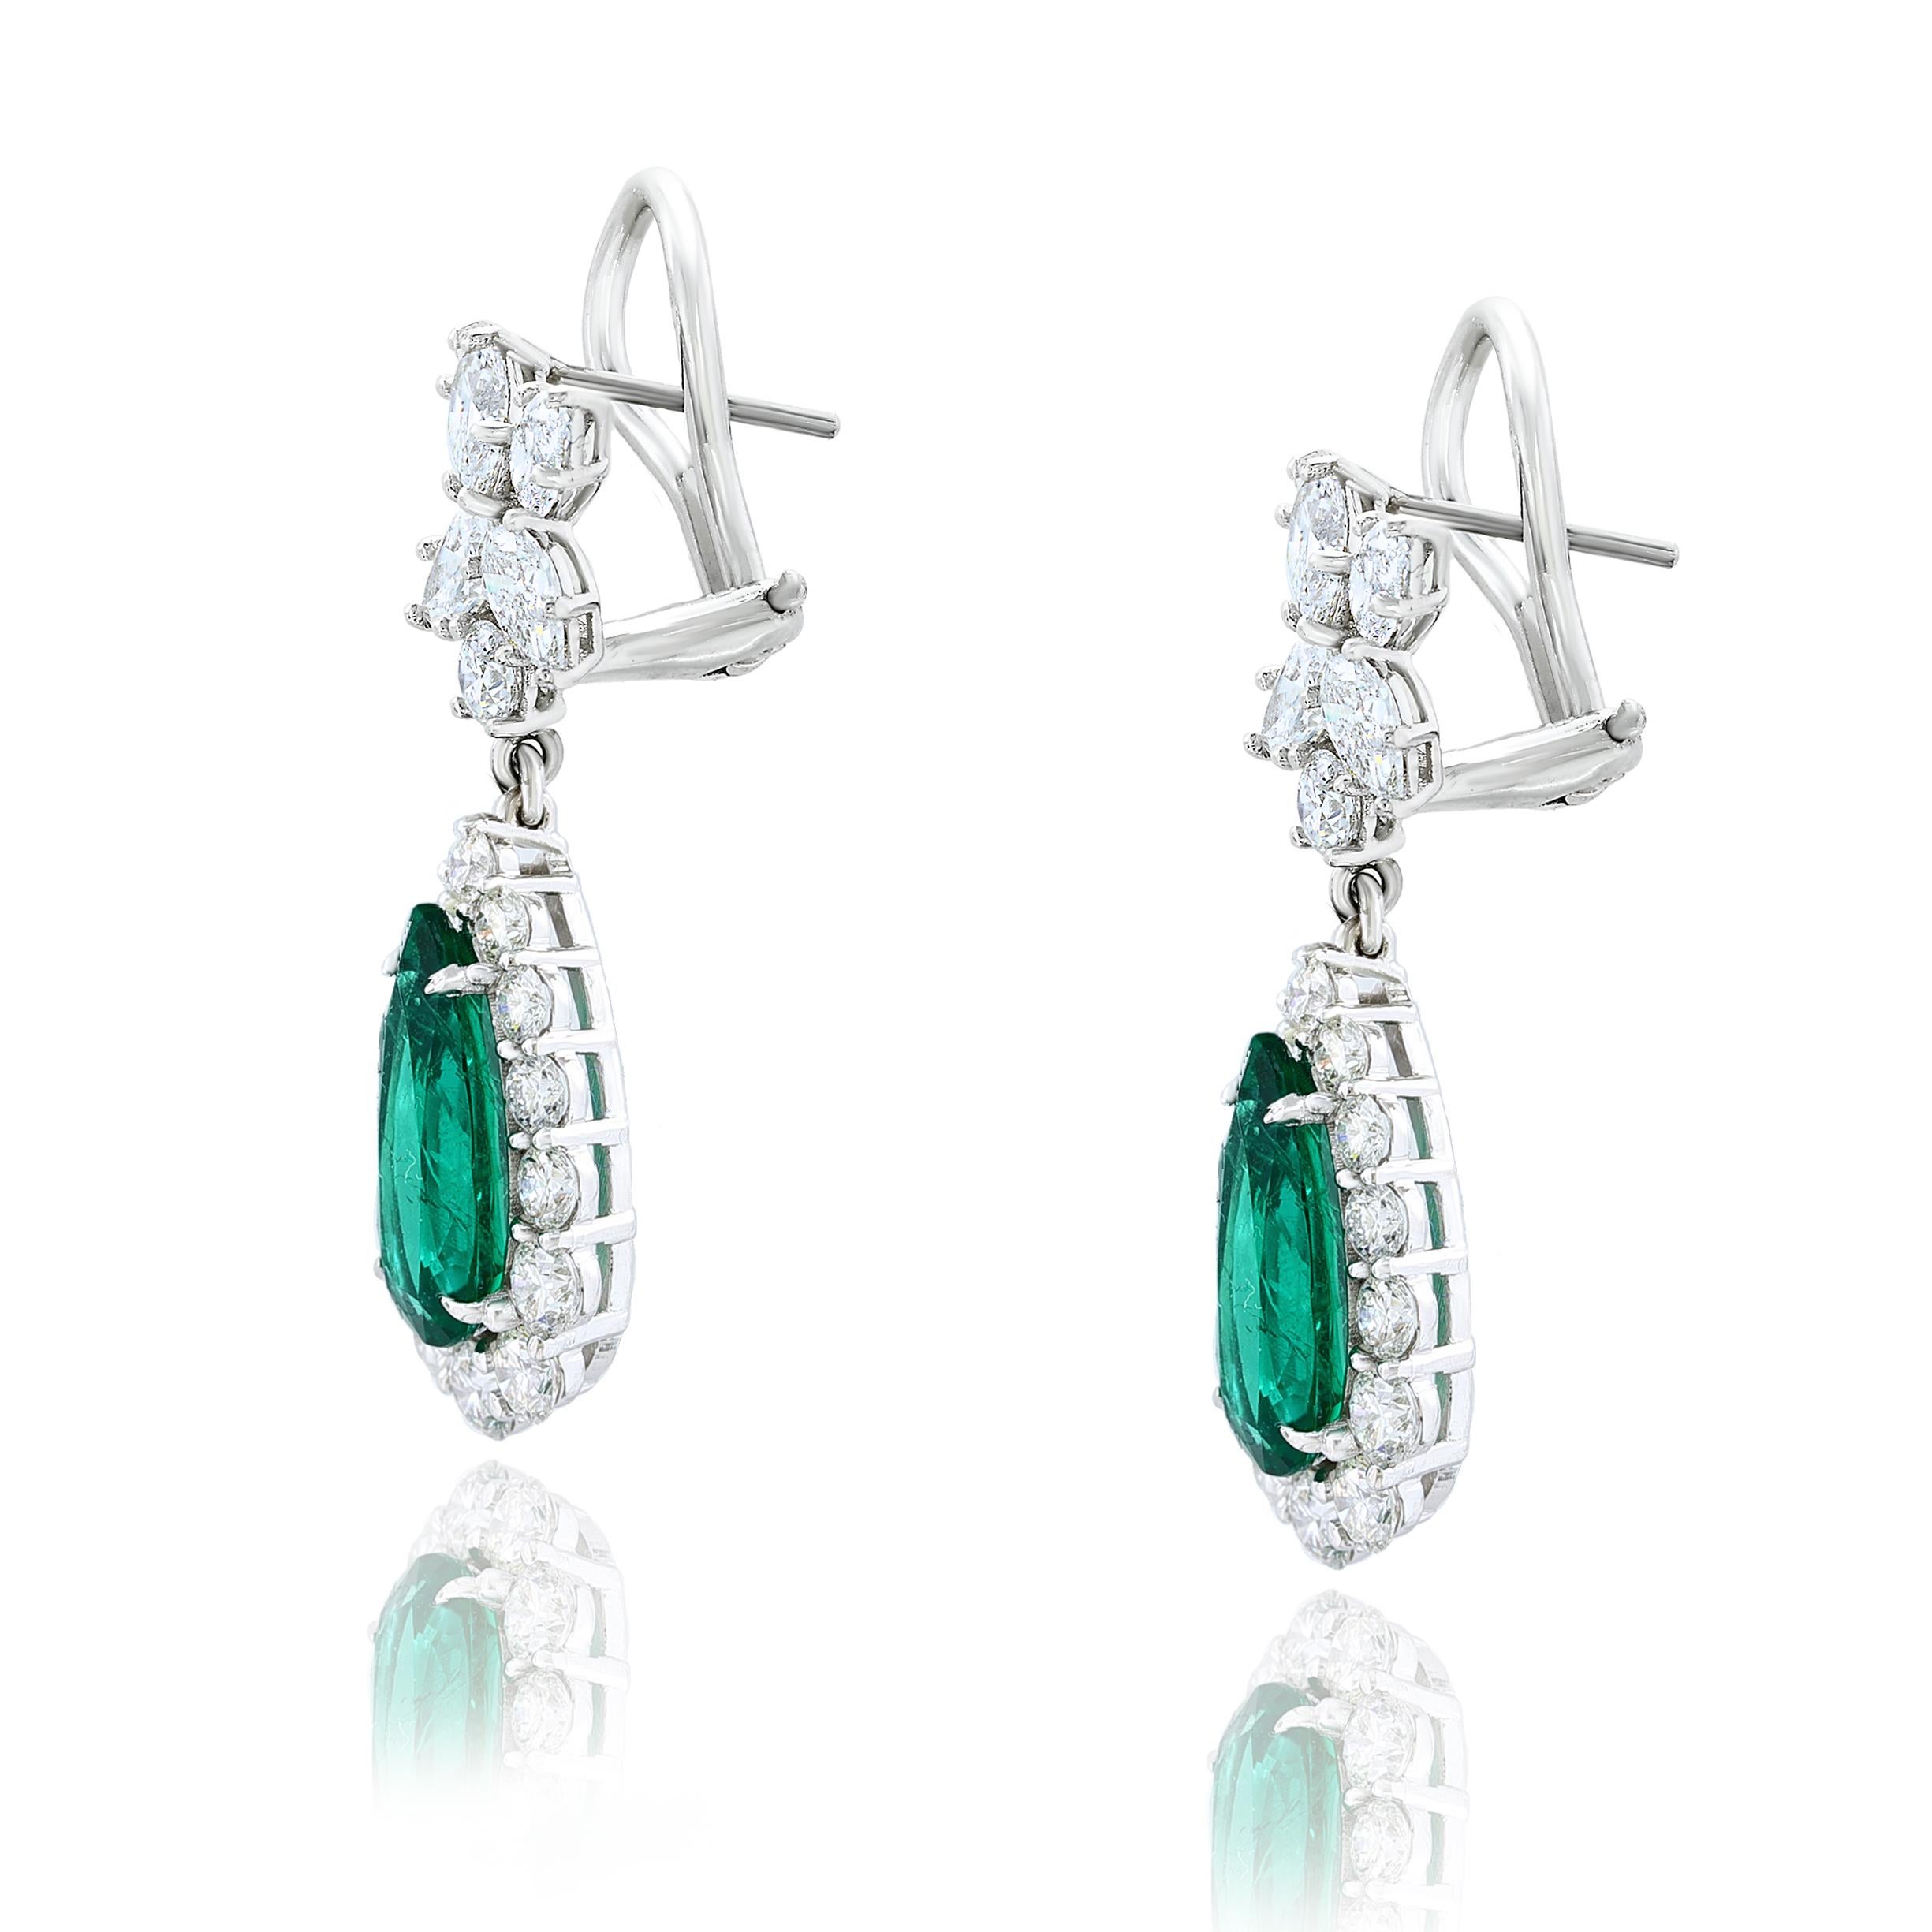 Contemporary 4.80 Carat Pear Shape Emerald and Diamond Drop Earrings in 18K White Gold For Sale